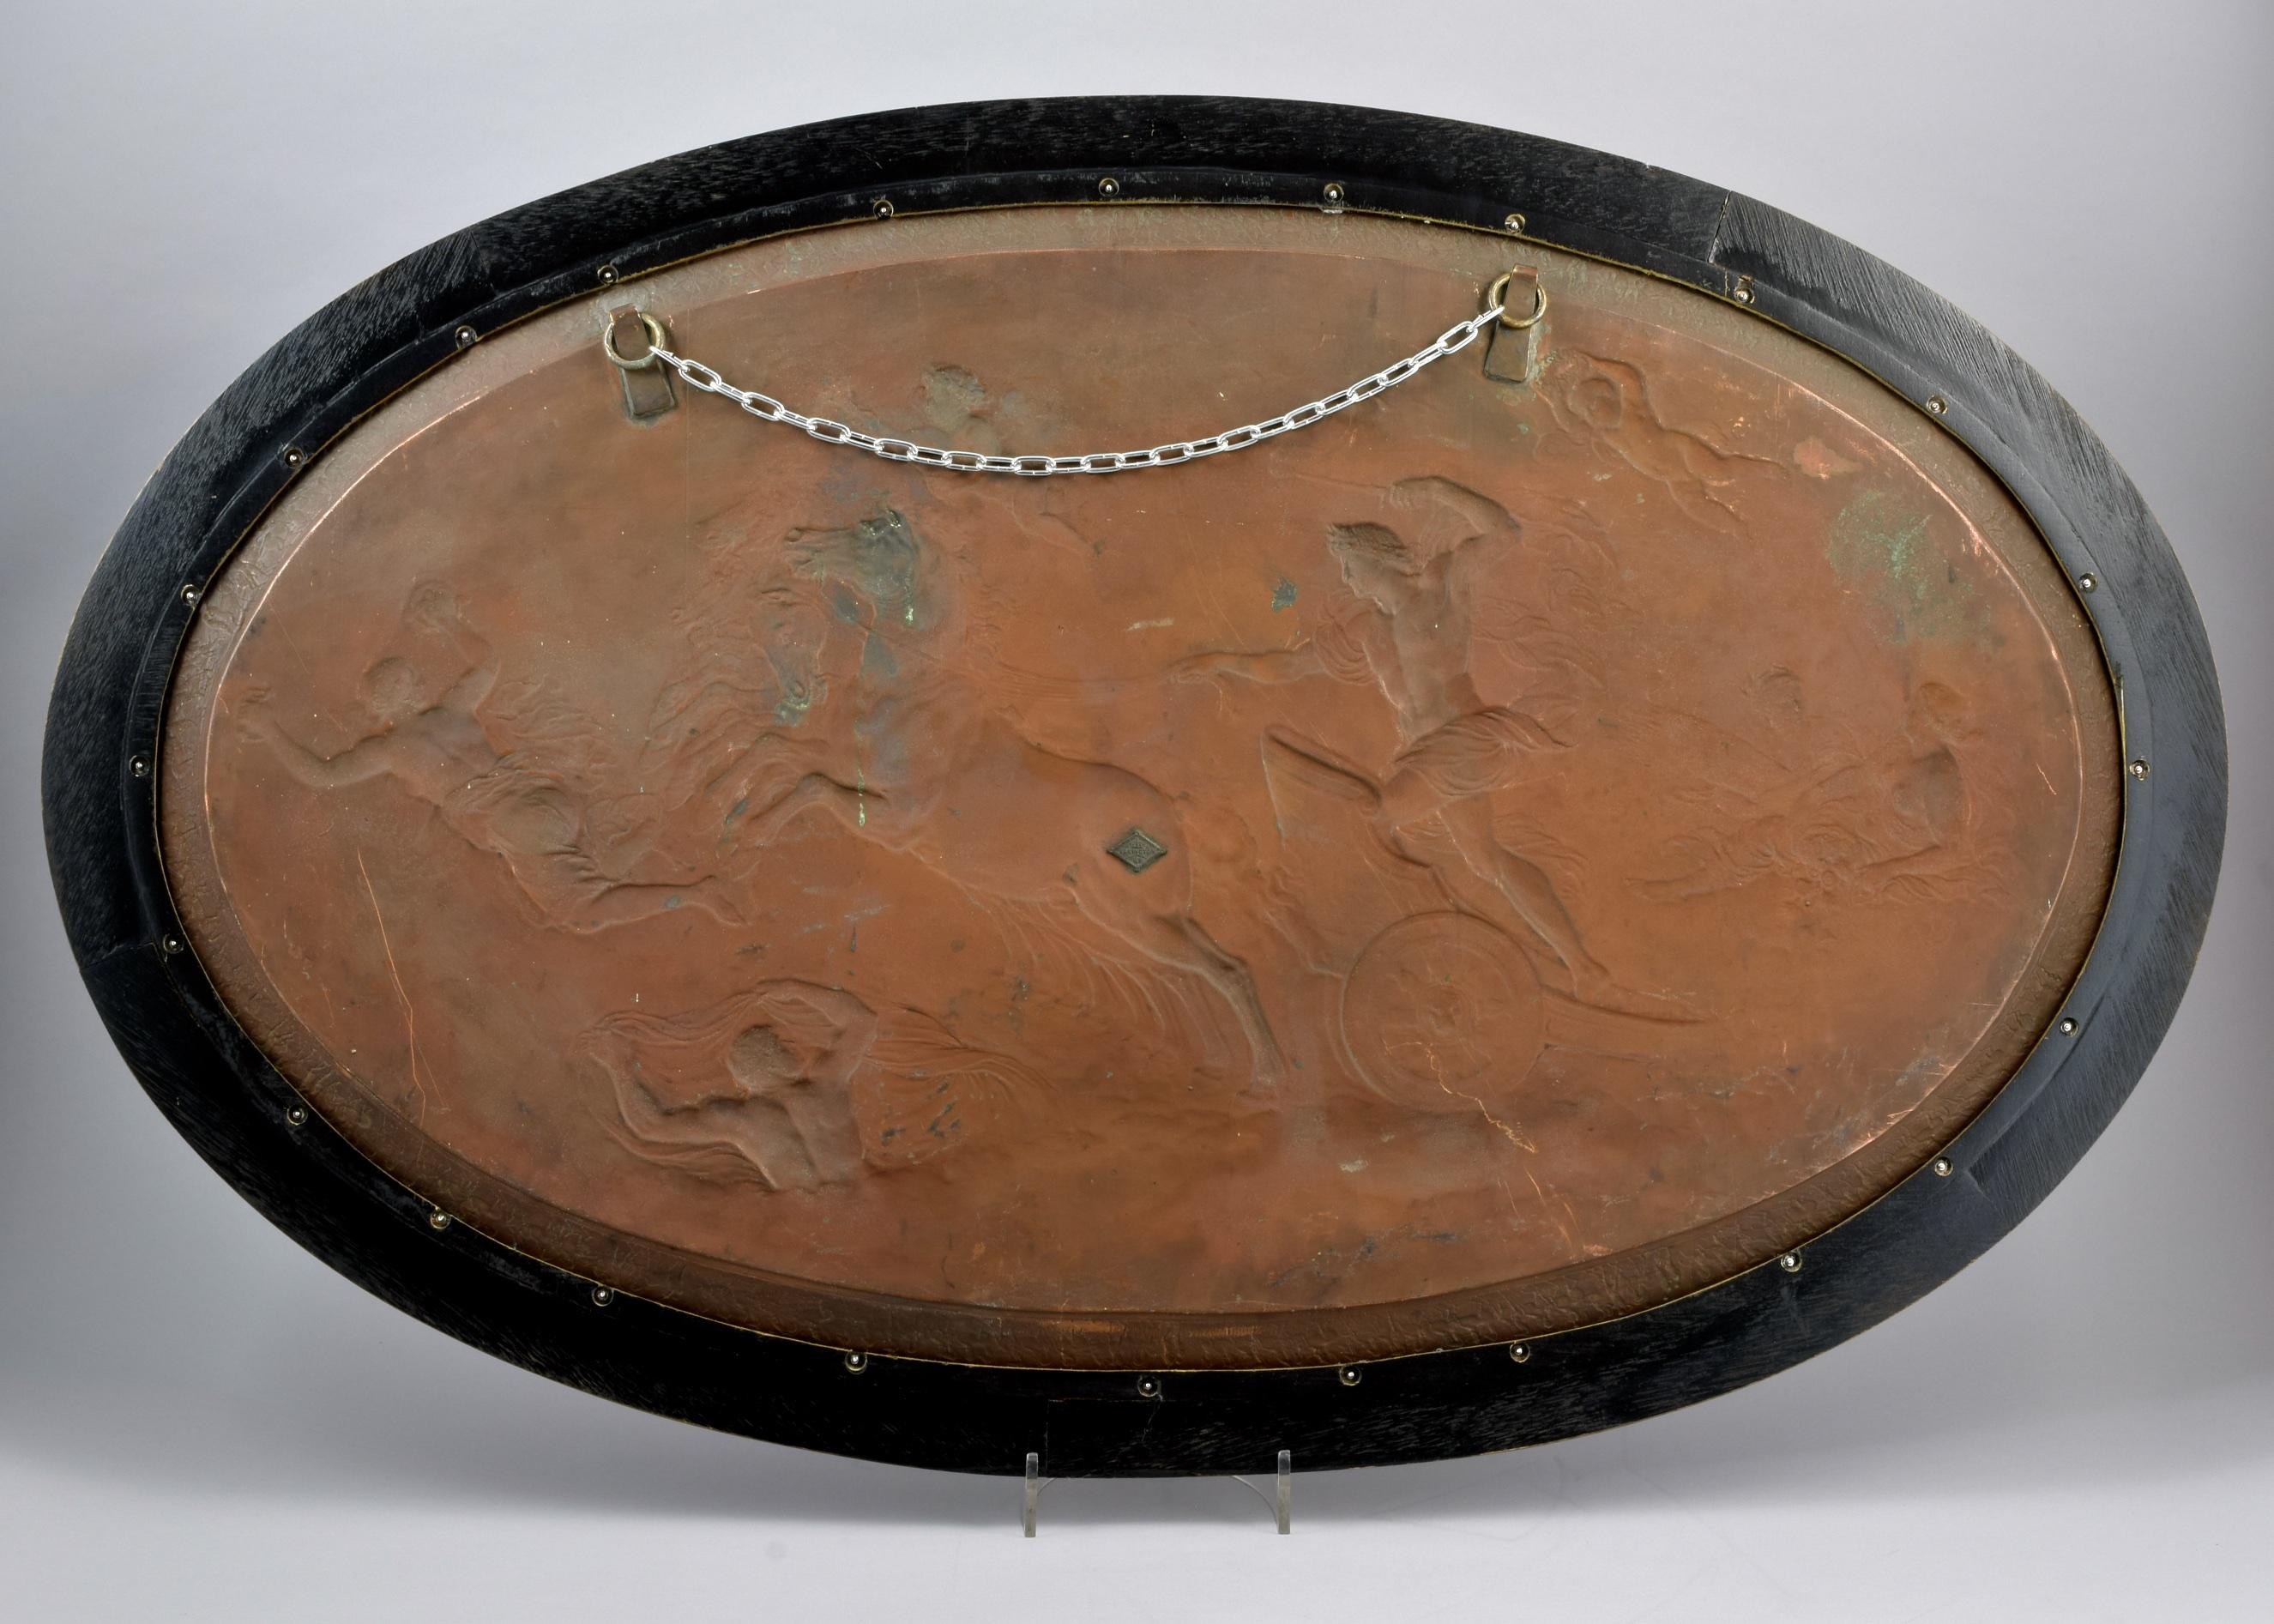 Likely depicting Hercules on a four horse drawn chariot. The boarder embellished with further classical scenes of horses and classical figures. In a wooden frame. Very good condition. 

Bibliography:

Elkington & Co, founded in Birmingham 1815, is